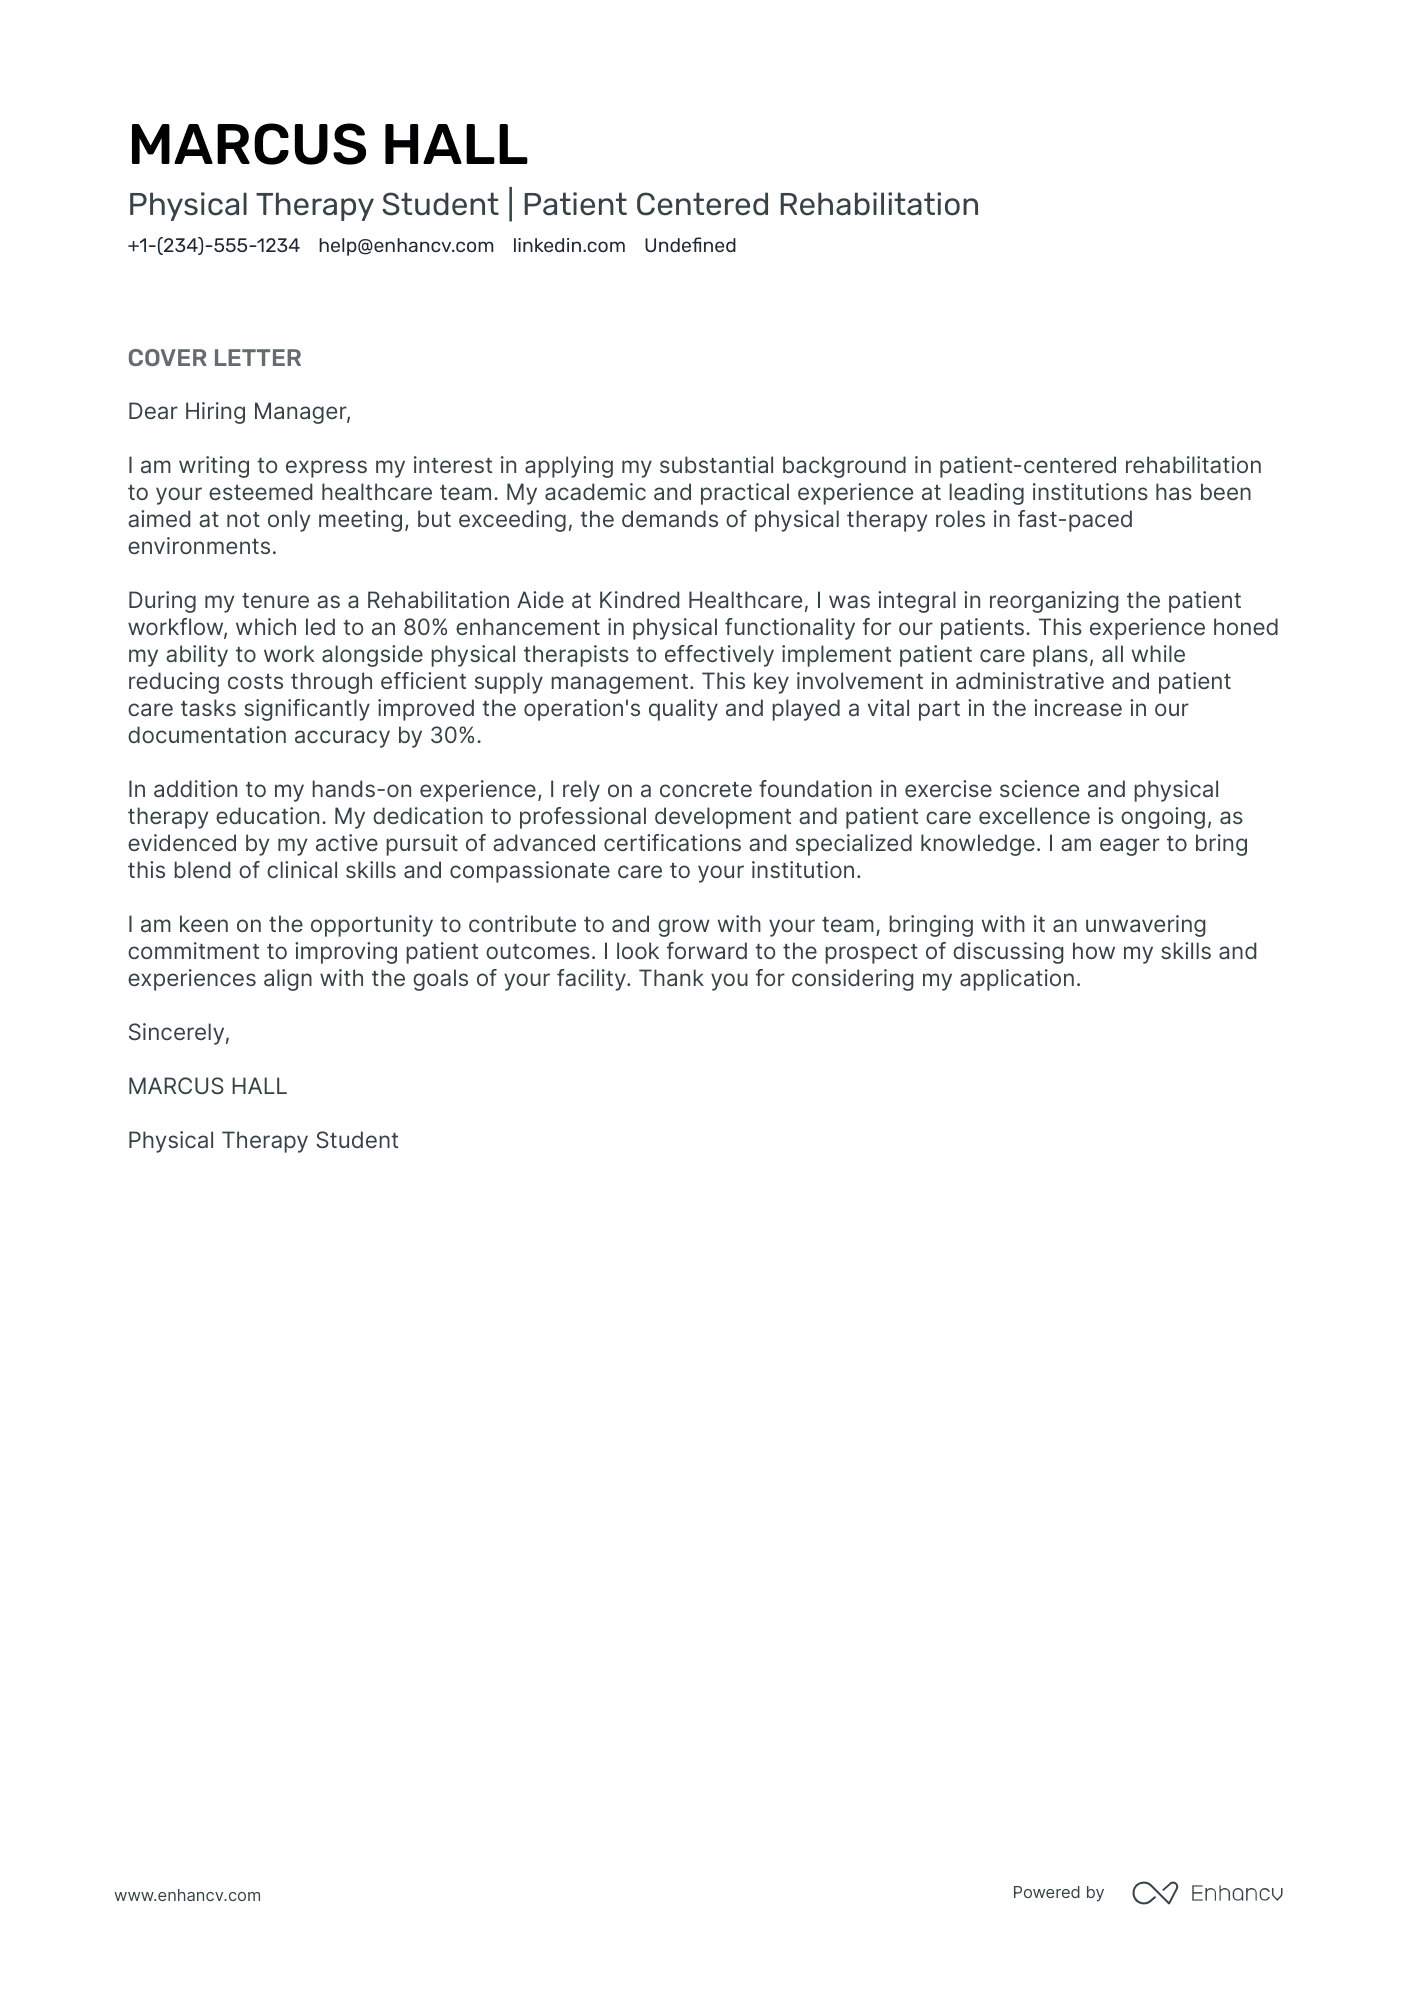 Physical Therapy Student cover letter